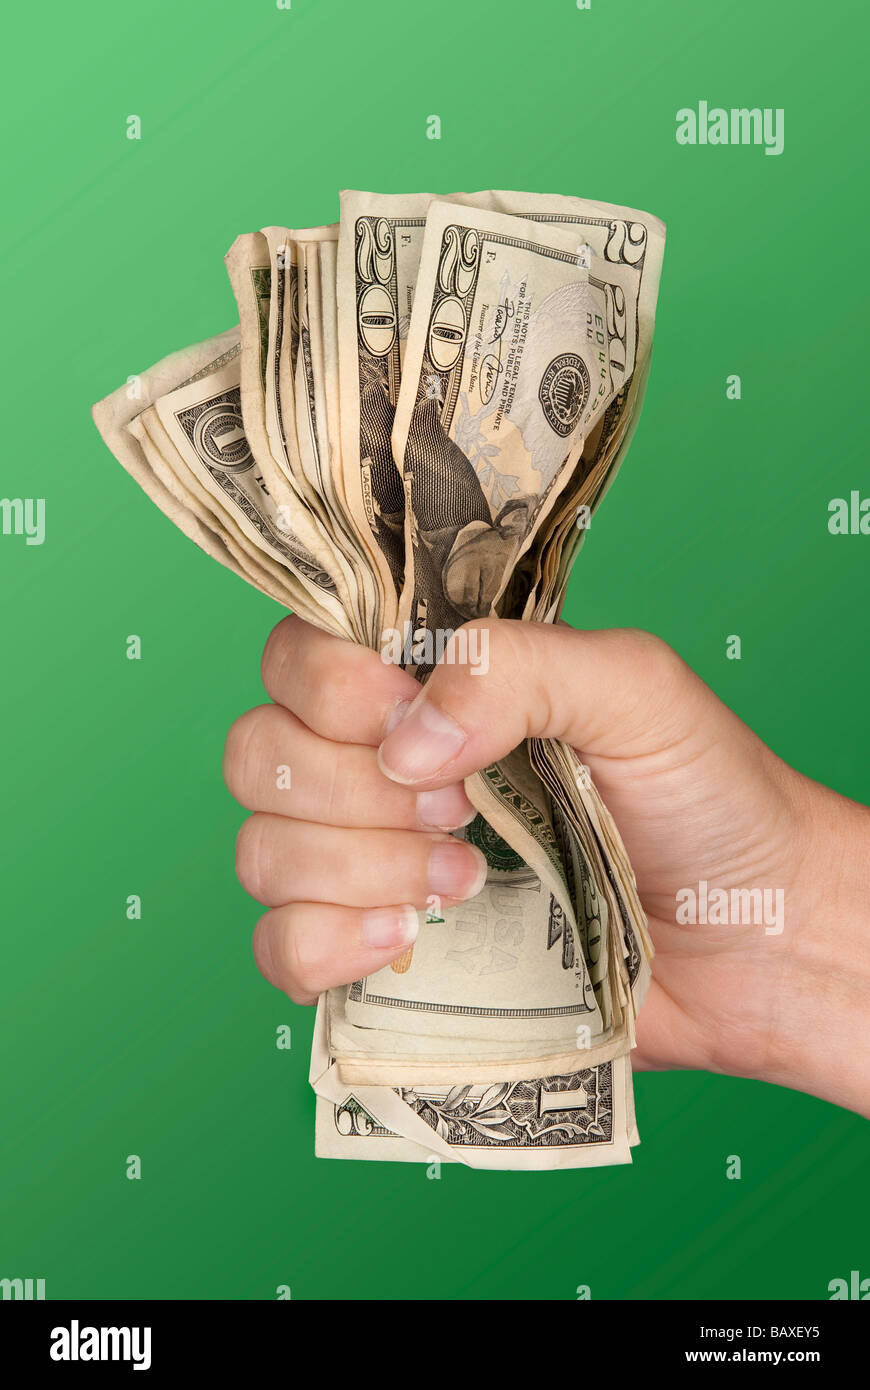 A woman grips a wad of cash hoping she doesn't lose it Stock Photo